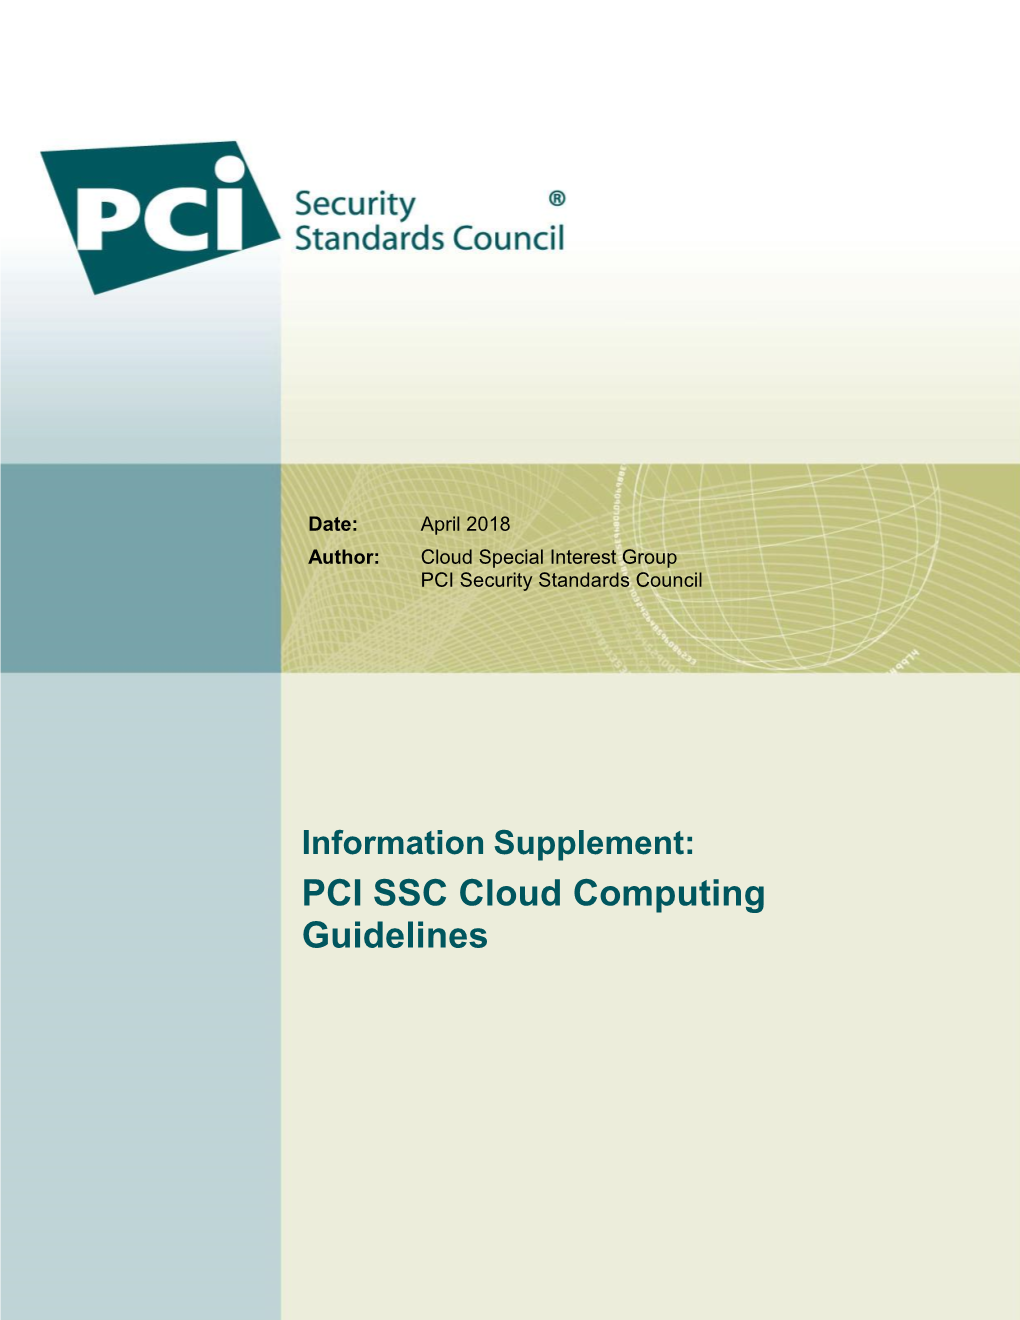 Information Supplement: PCI SSC Cloud Computing Guidelines